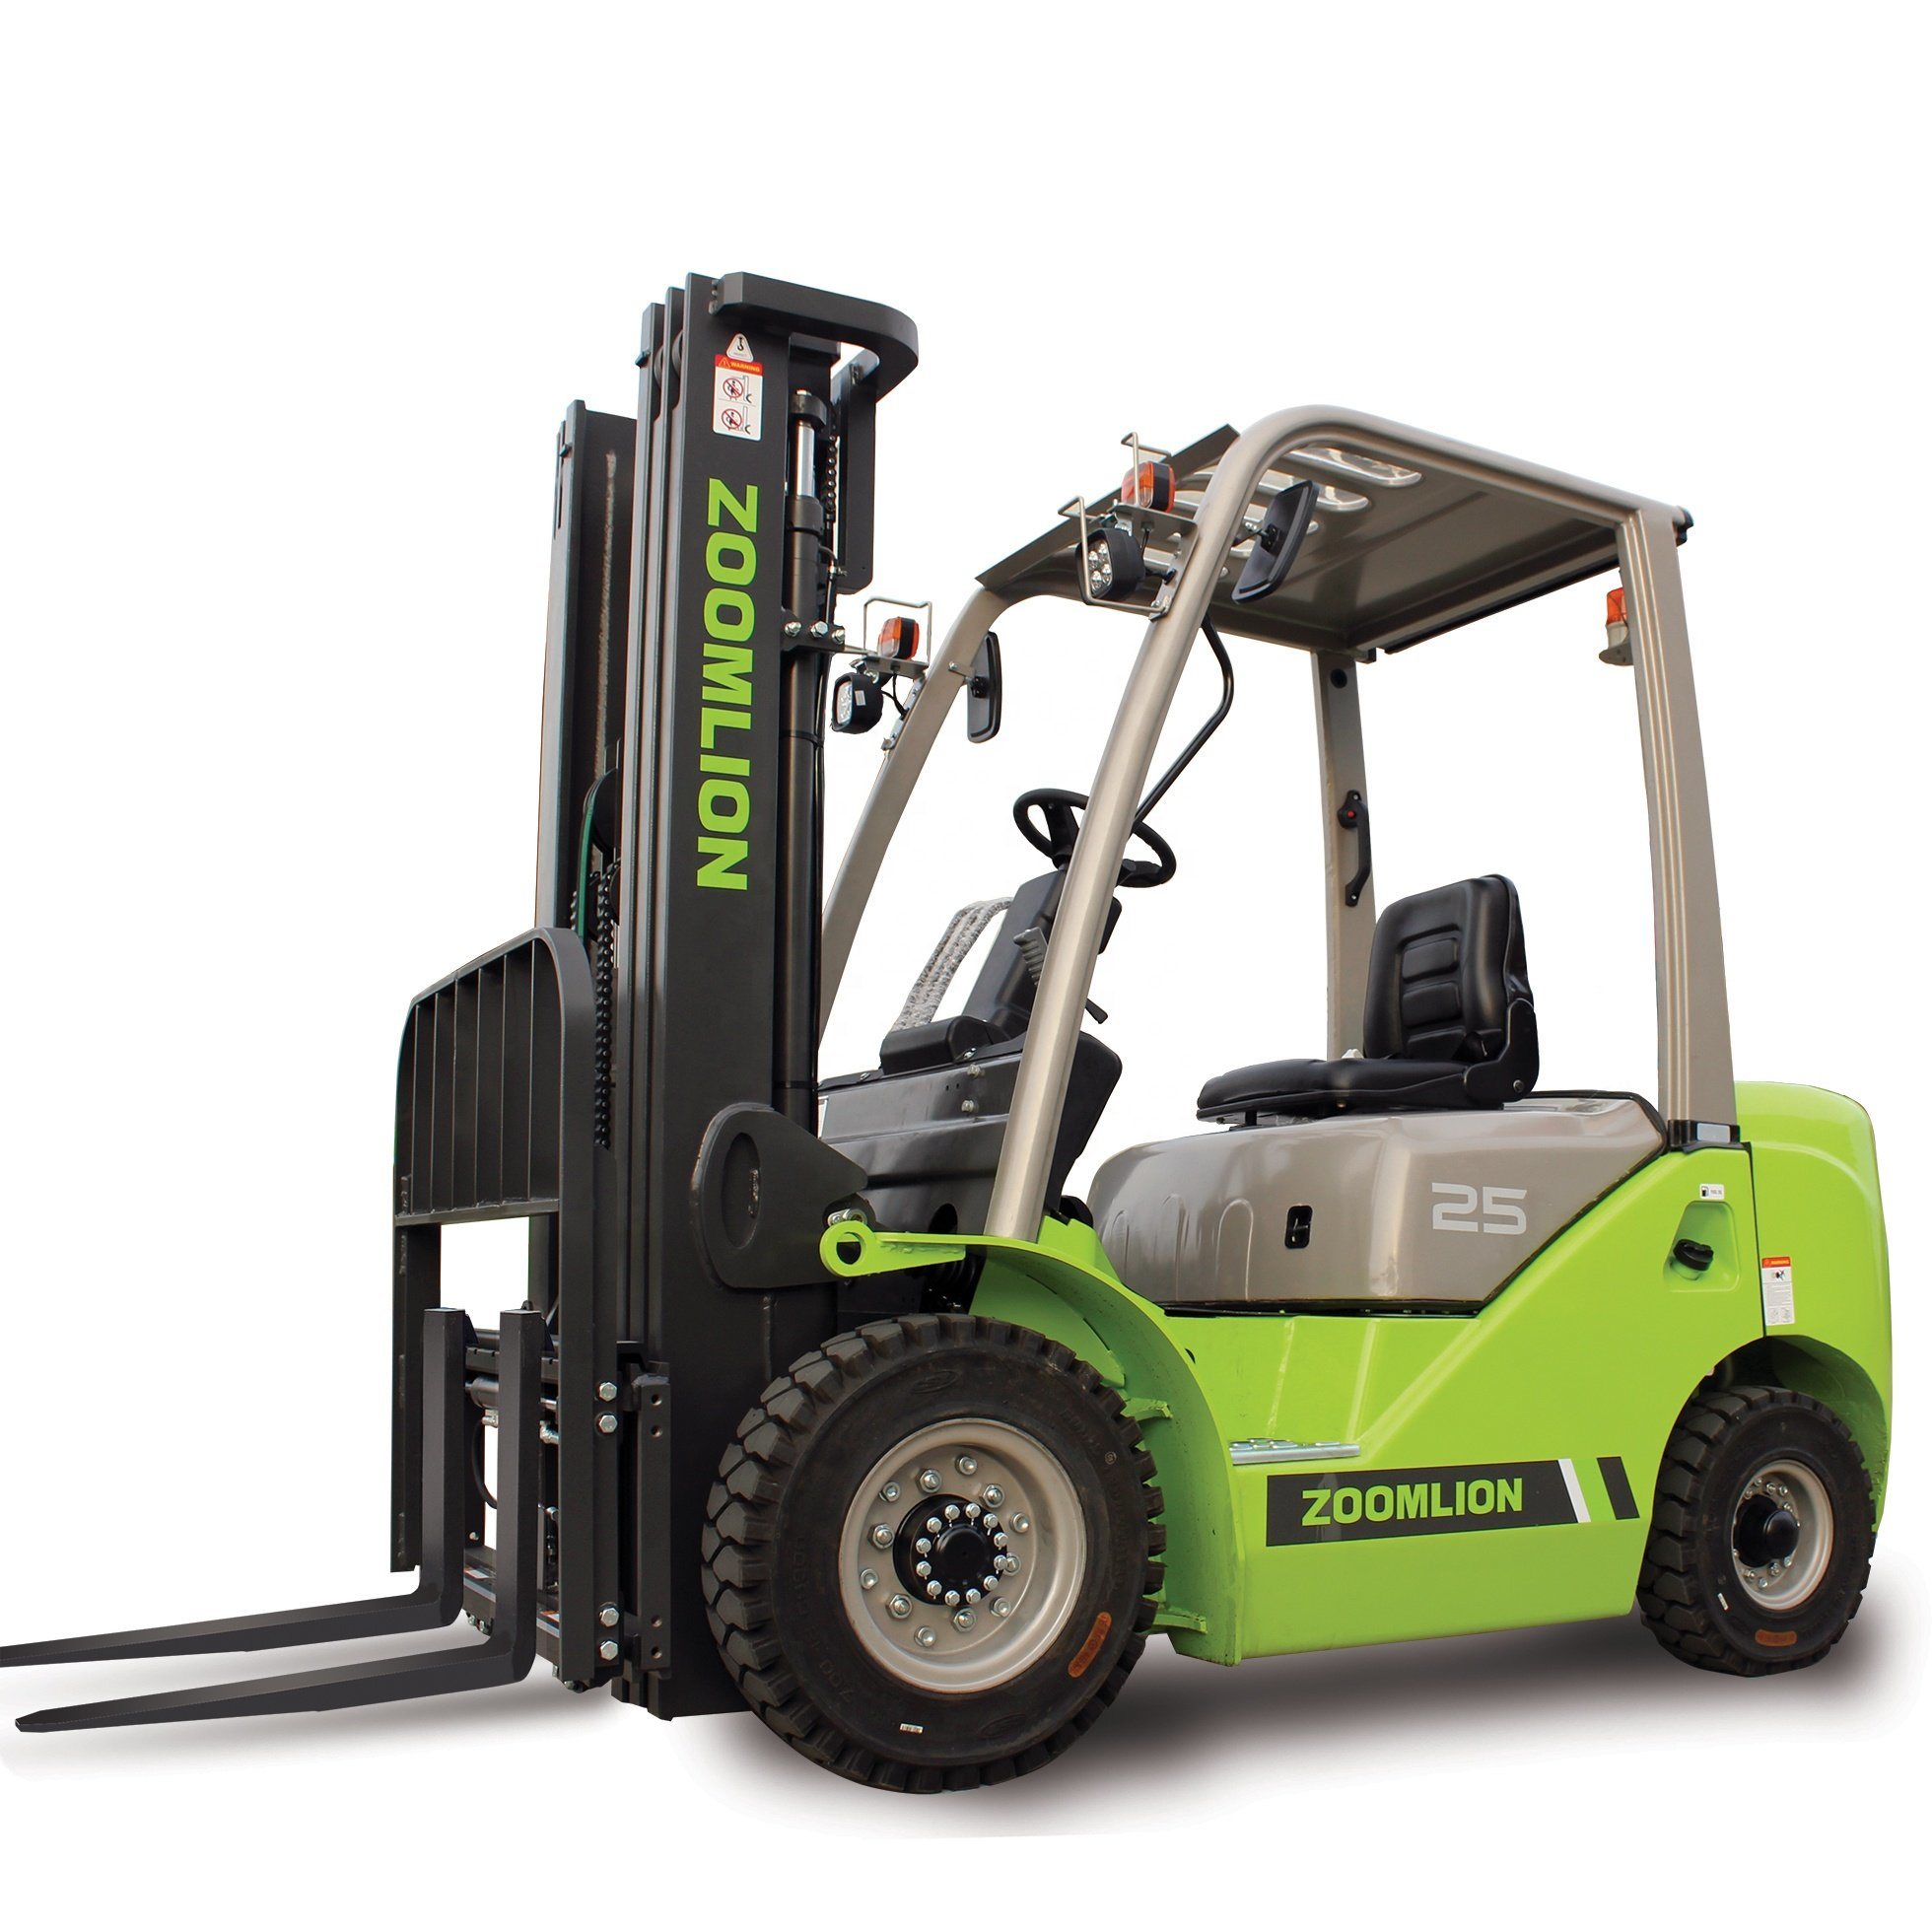 Zoomlion 2.5 Ton Mini Diesel Counterbalanced Forklift Fd25h with Triple Mast